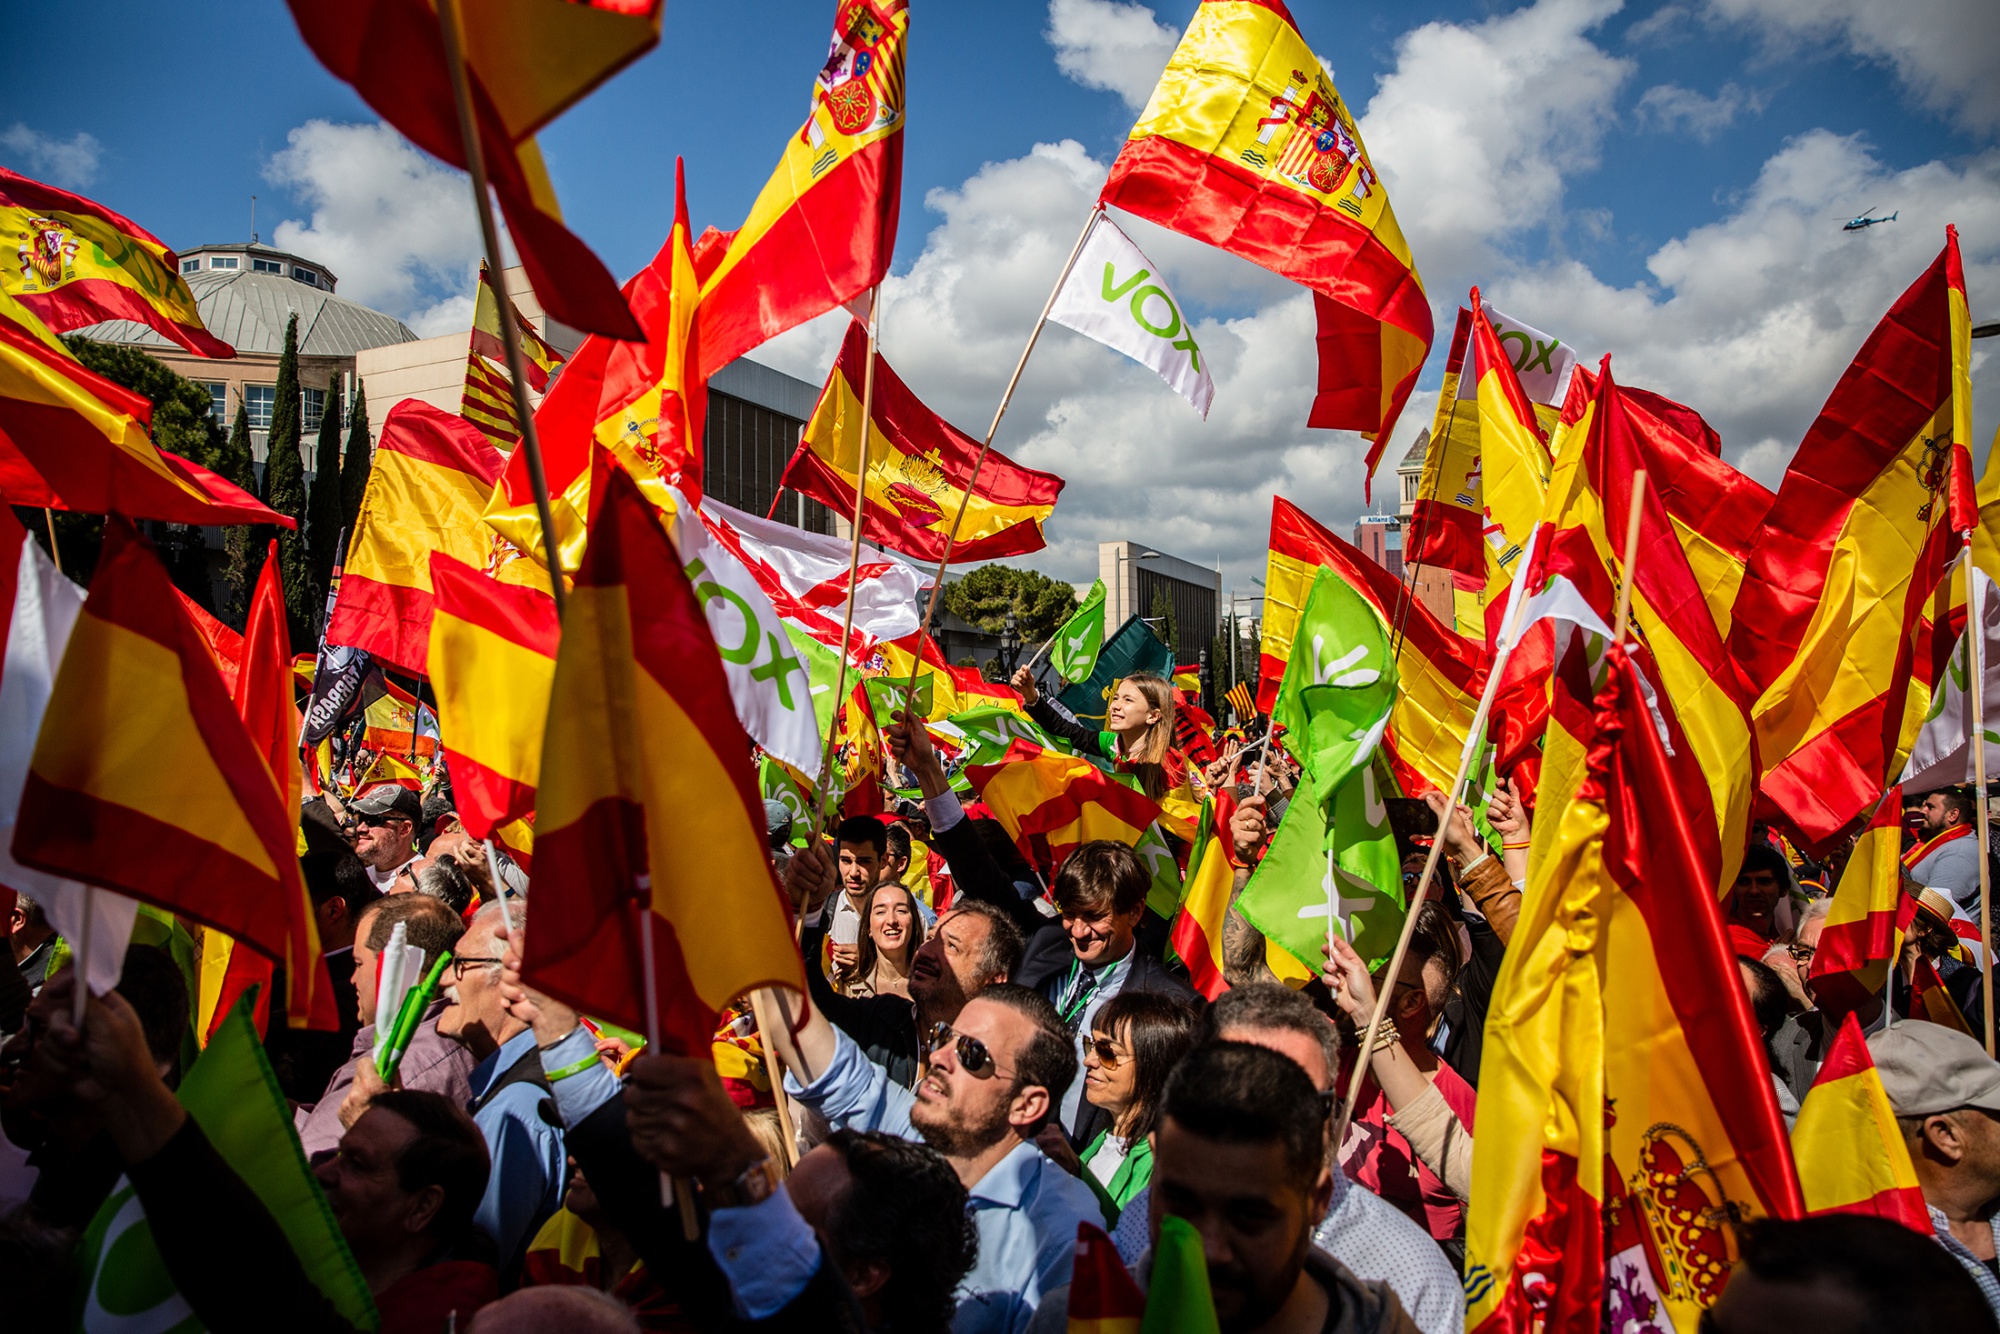 Attendees wave Spanish national flags during a Vox party rally in Barcelona on March 30.